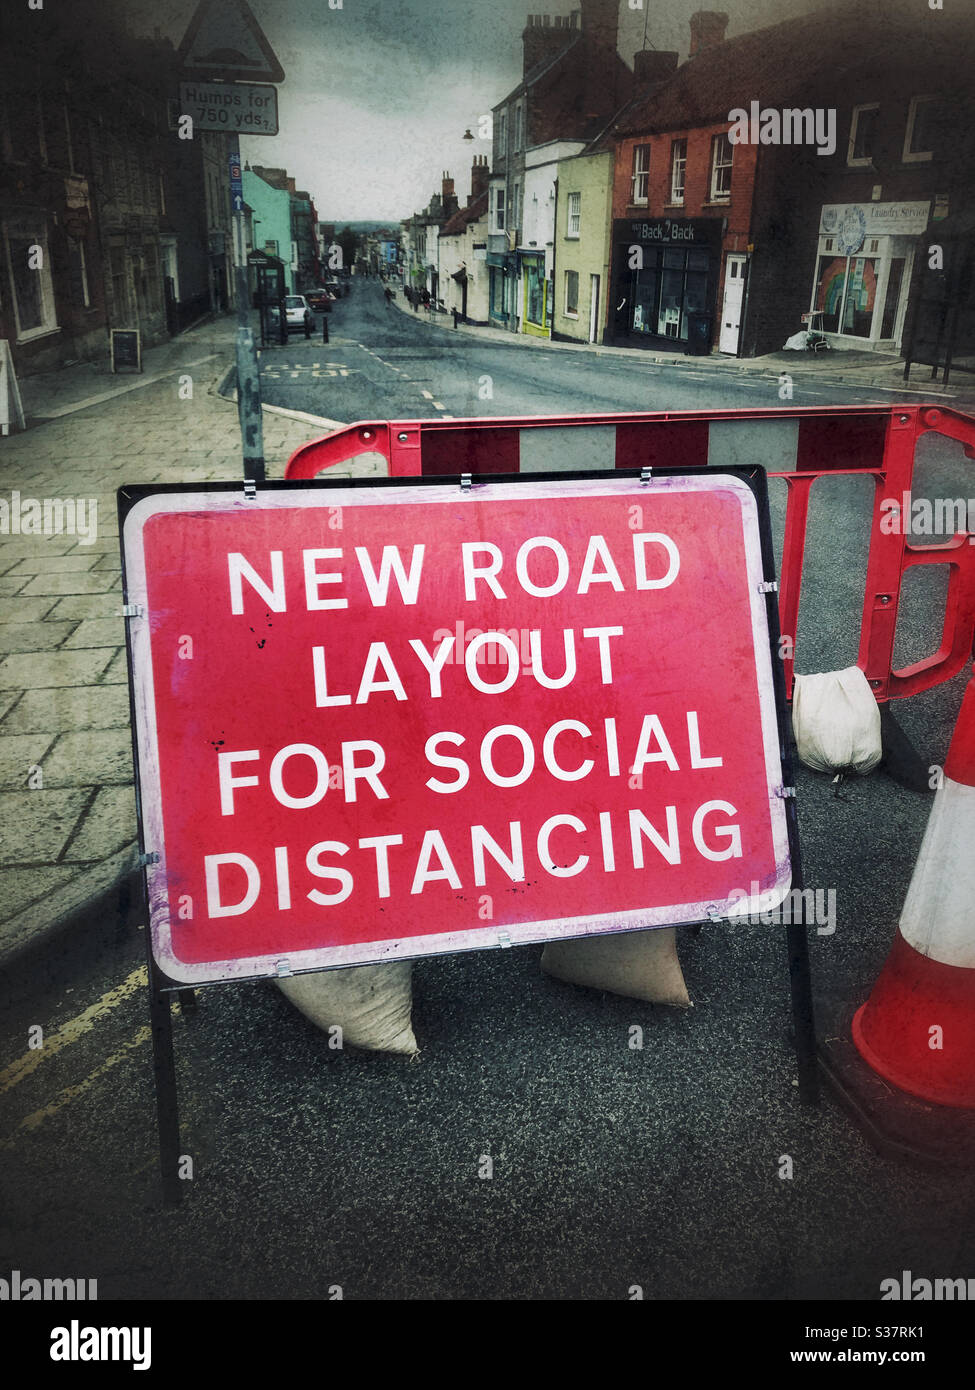 A new road layout for social distancing sign Stock Photo